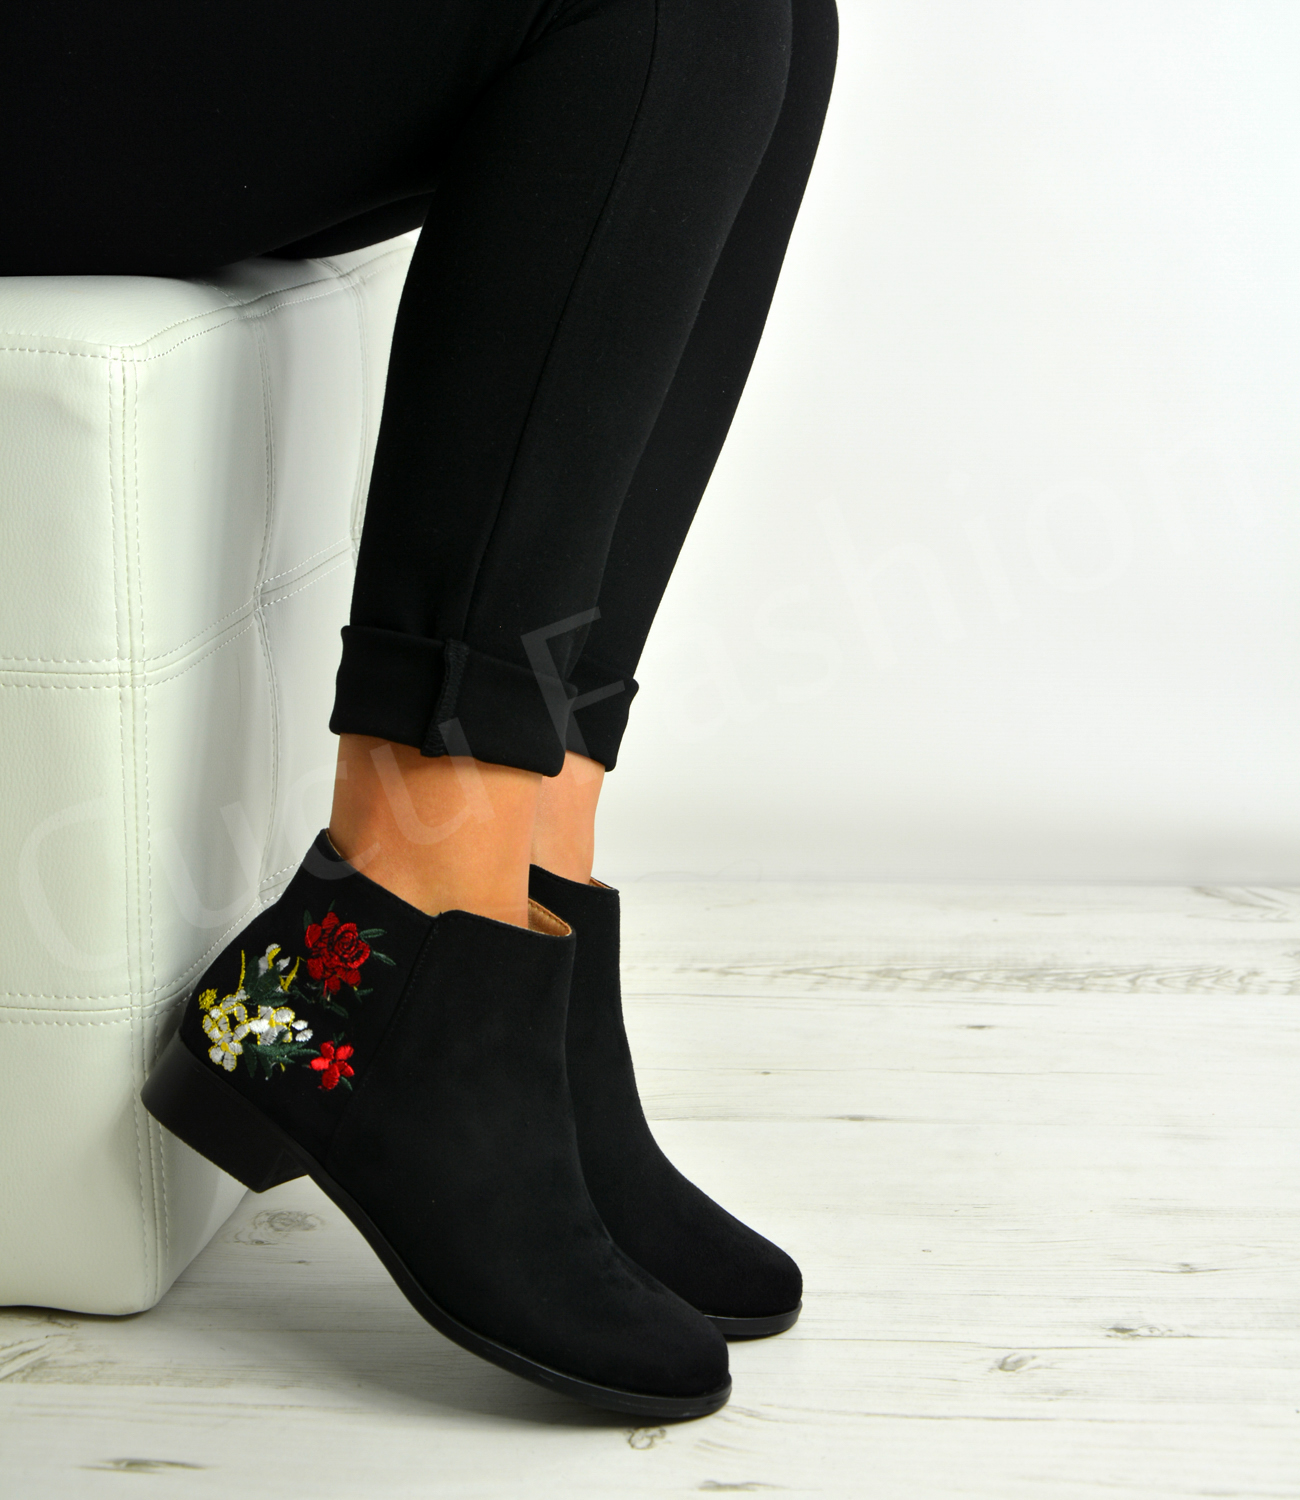 New Womens Ladies Ankle Boots Embroidered Flowers Zip Low Heel Shoes ...